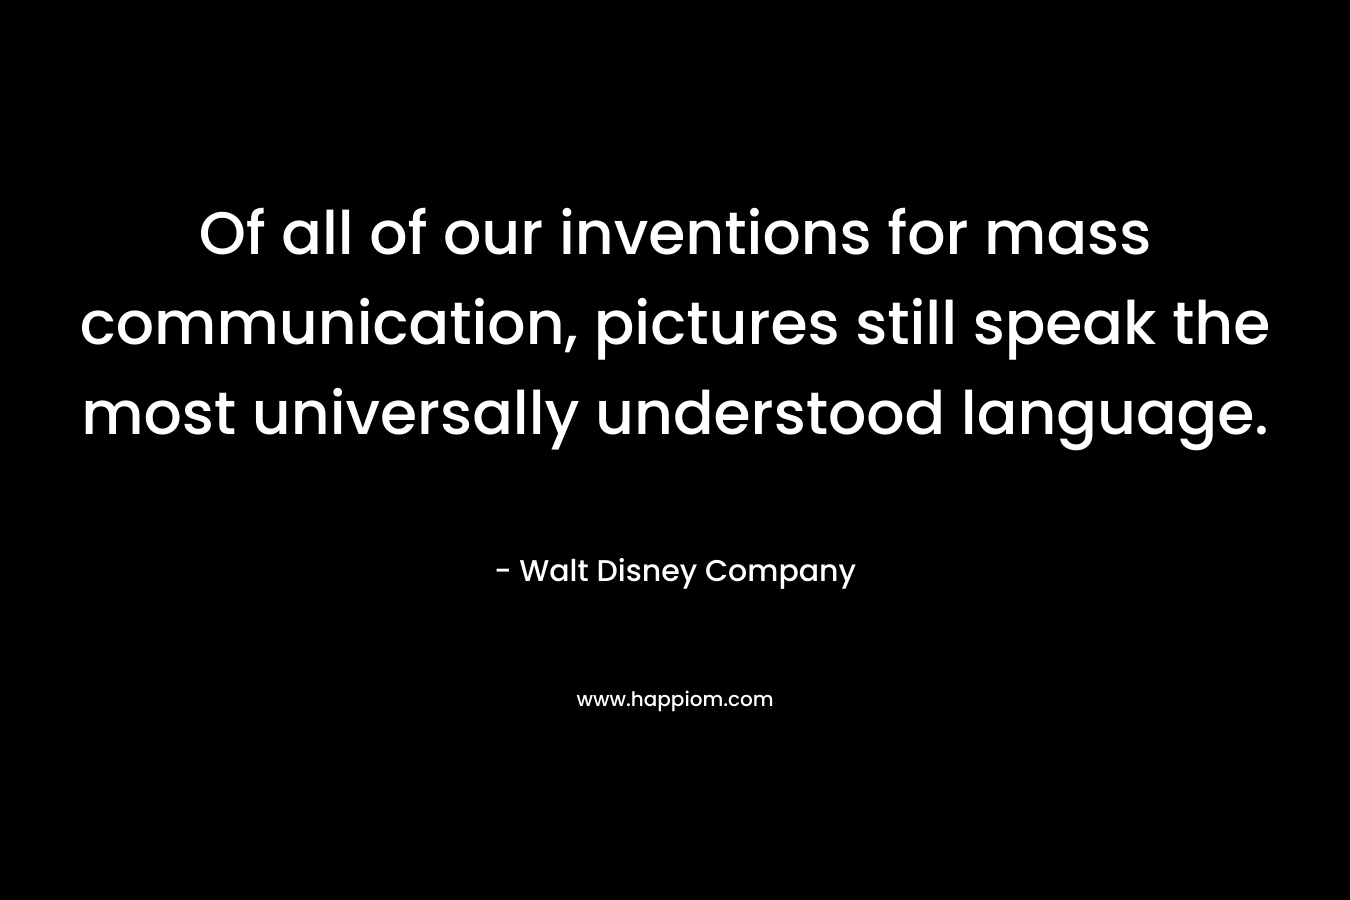 Of all of our inventions for mass communication, pictures still speak the most universally understood language. – Walt Disney Company